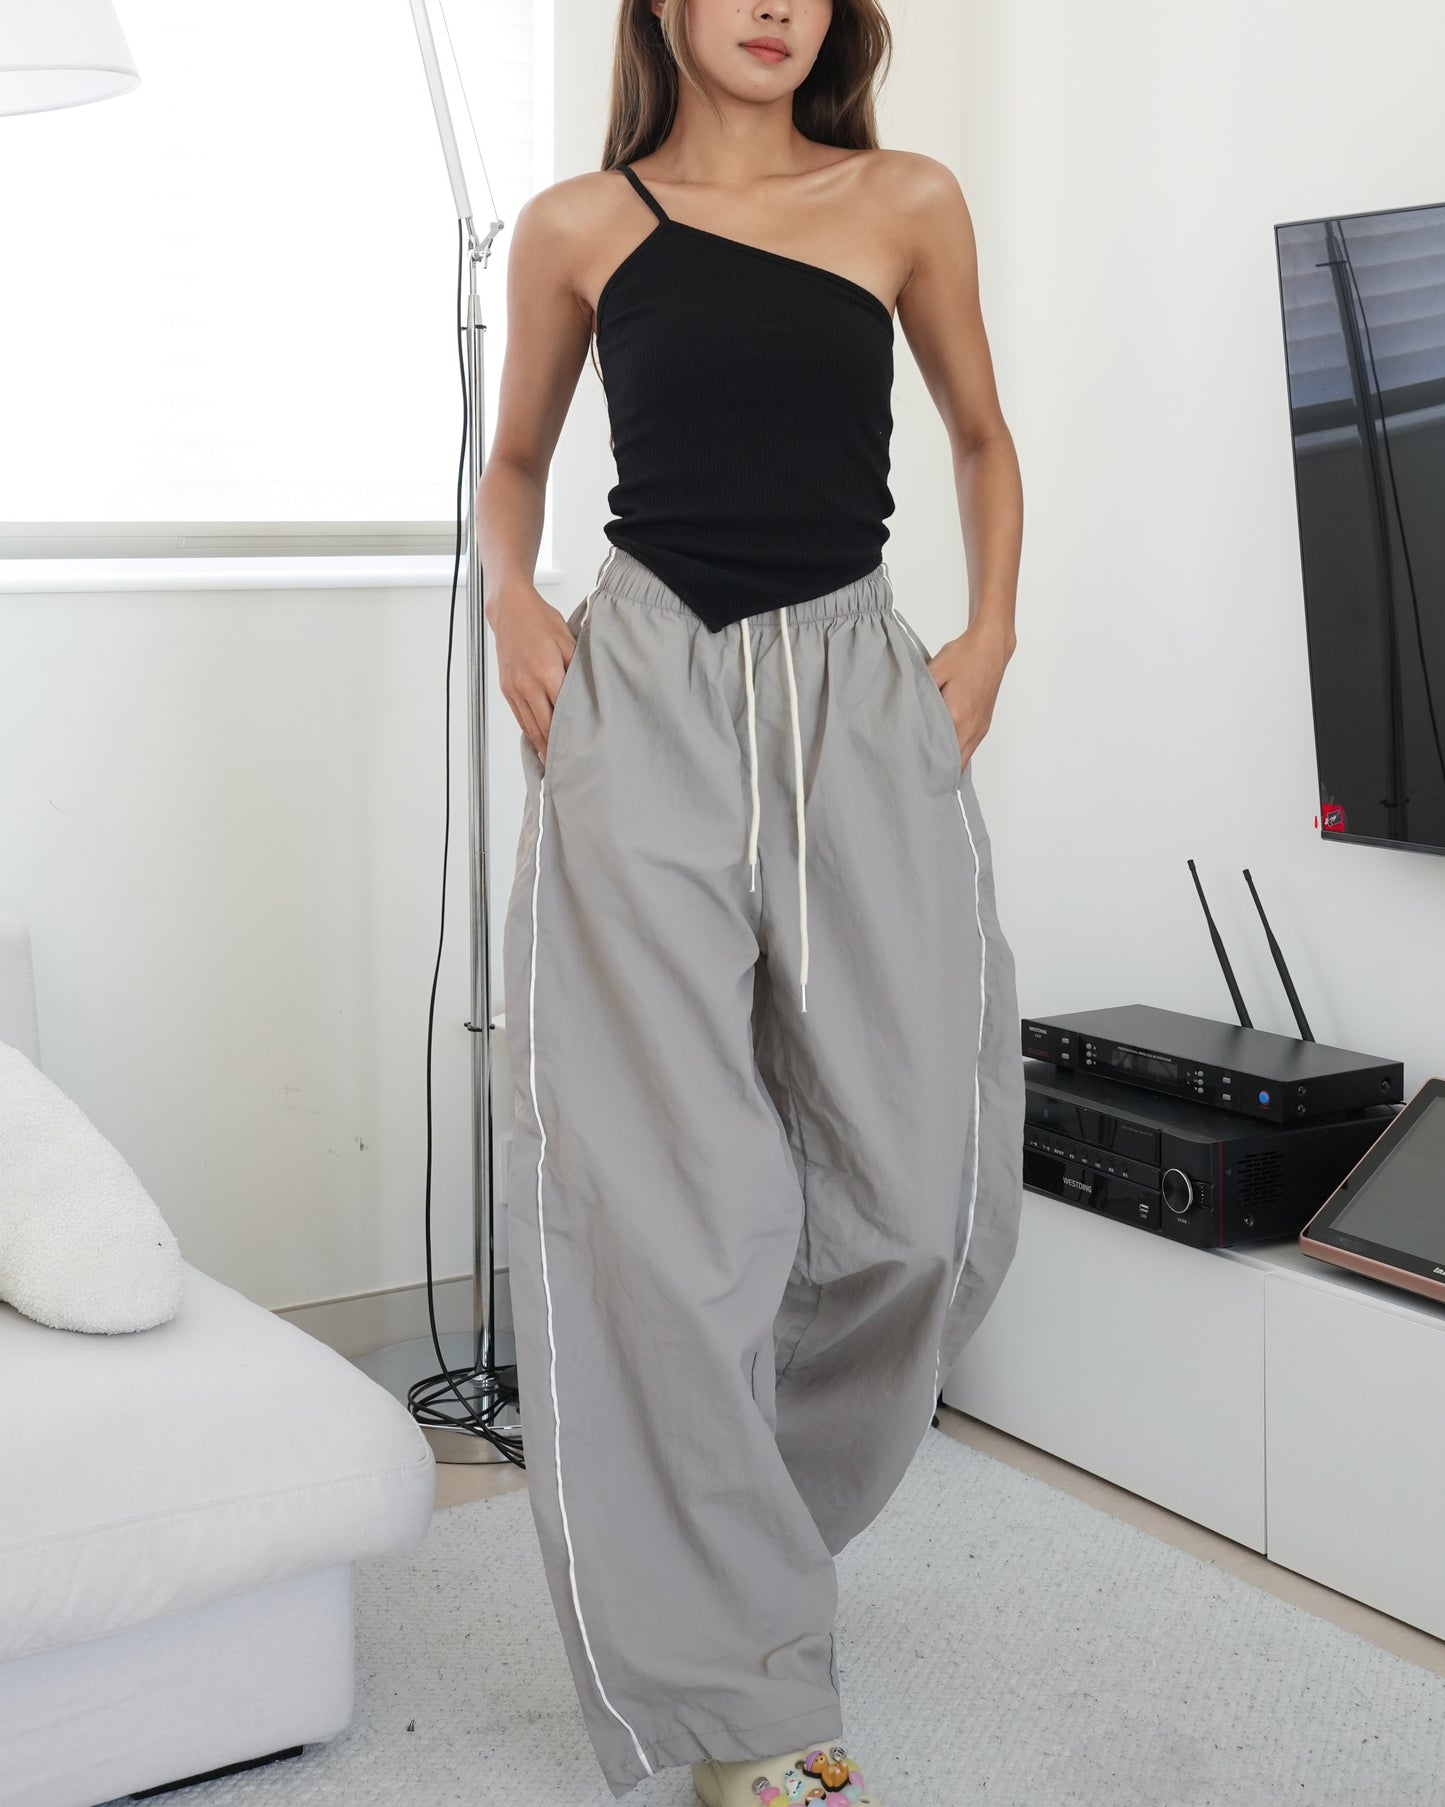 Double piping line parachute pants